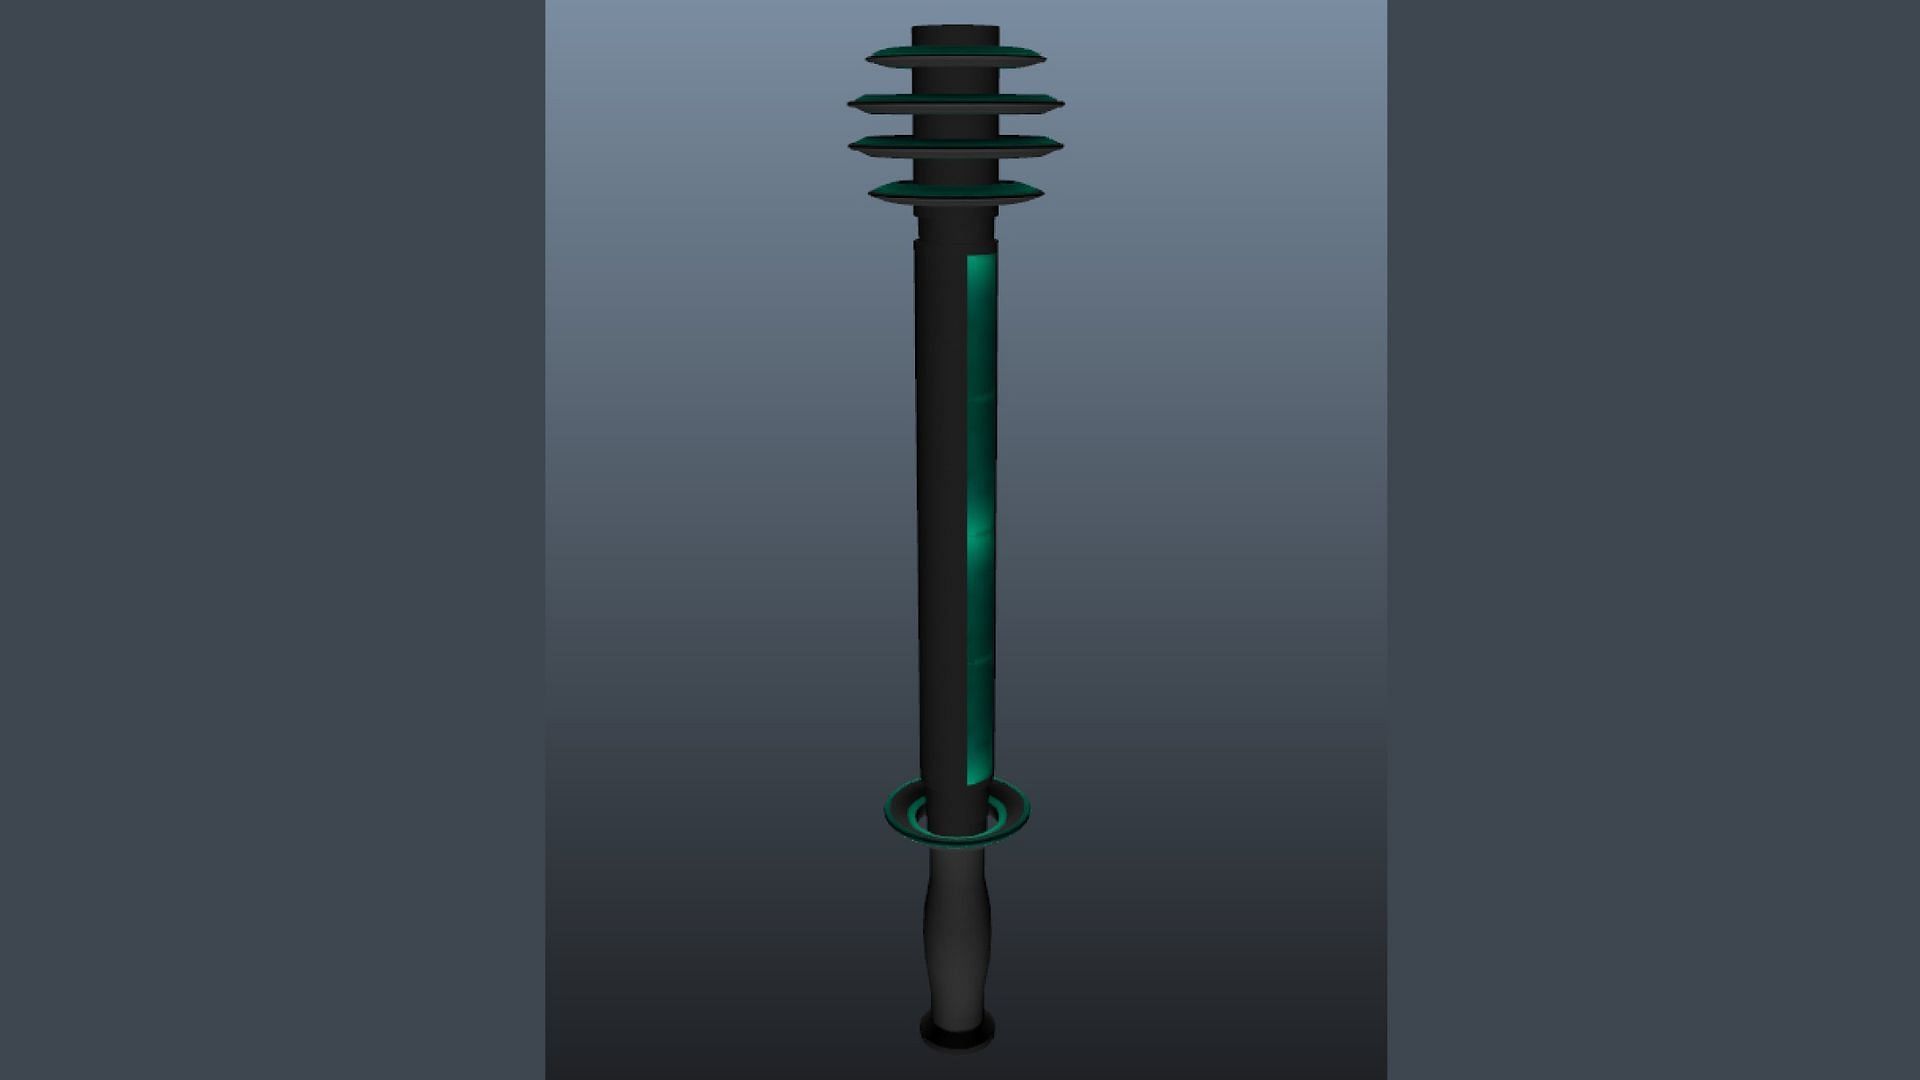 A new melee stun weapon will arrive as part of the drip-feed content. (Image via X/@morsmutual_)